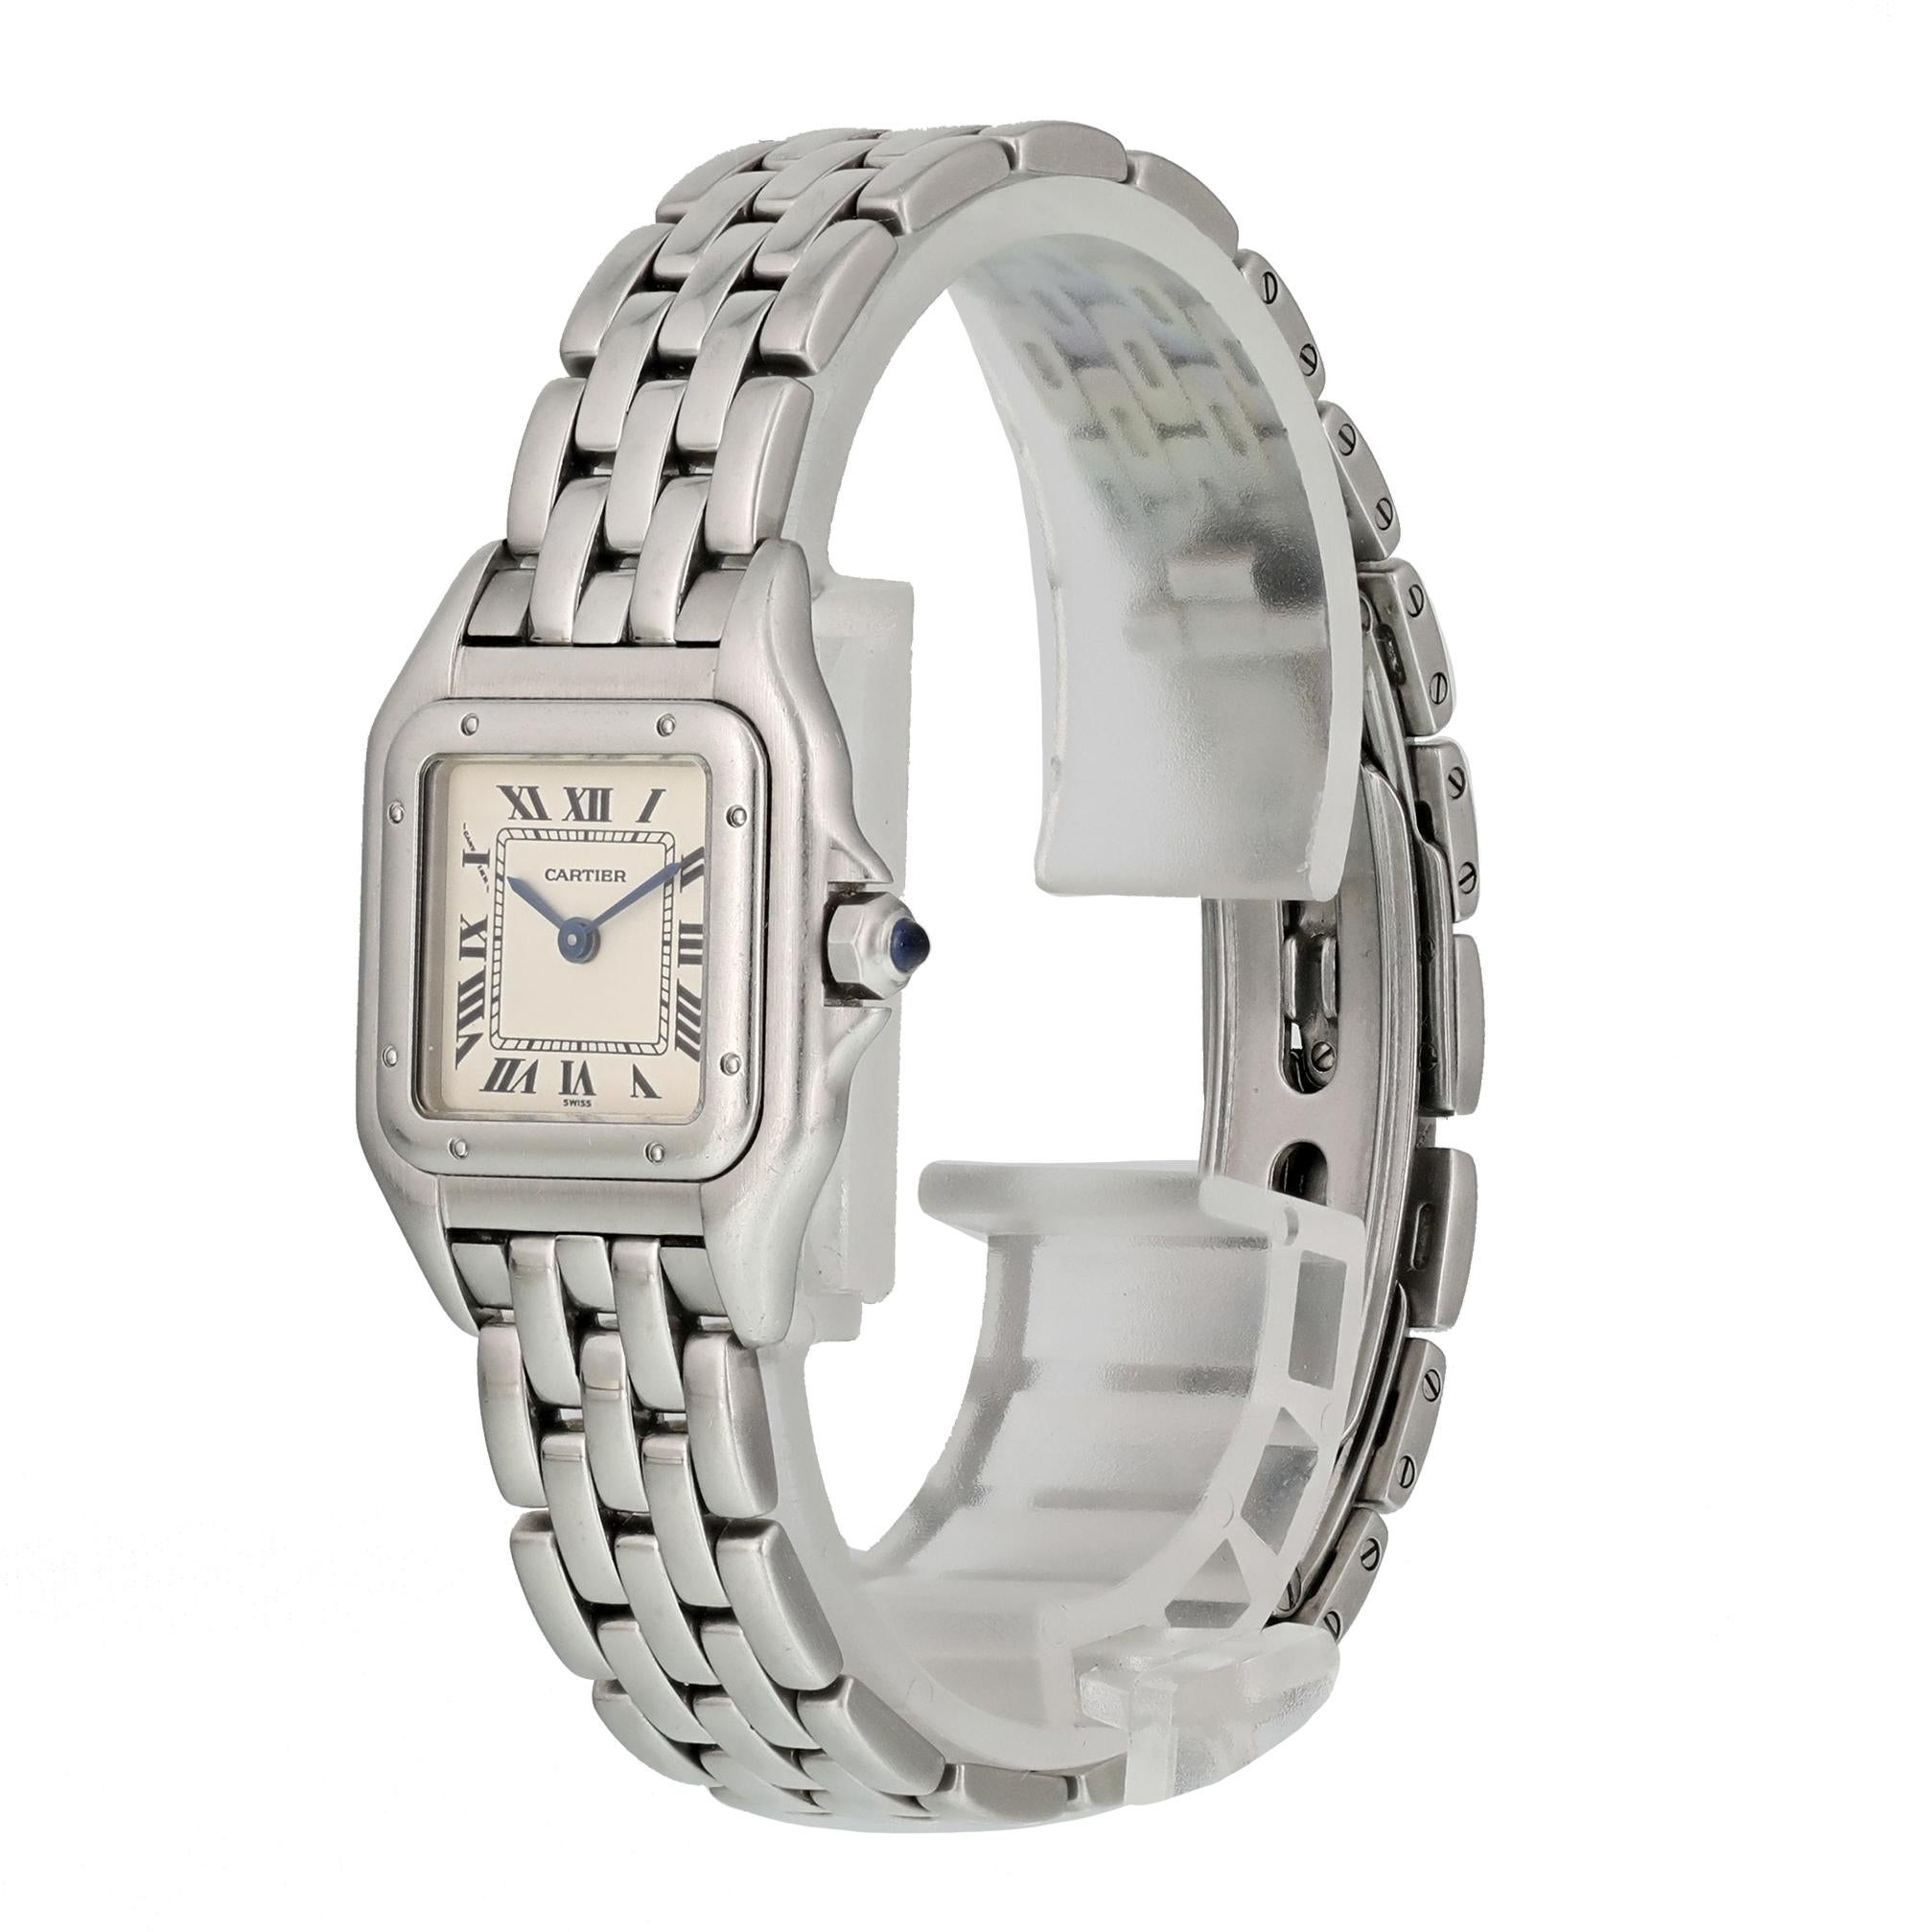 Cartier Panthere 1120 Ladies Watch. 
22mm Stainless Steel case. 
Stainless Steel Stationary bezel. 
White dial with blue steel hands and index hour markers. 
Minute markers on the inner dial. 
Stainless Steel Bracelet with Fold Over Clasp. 
Will fit